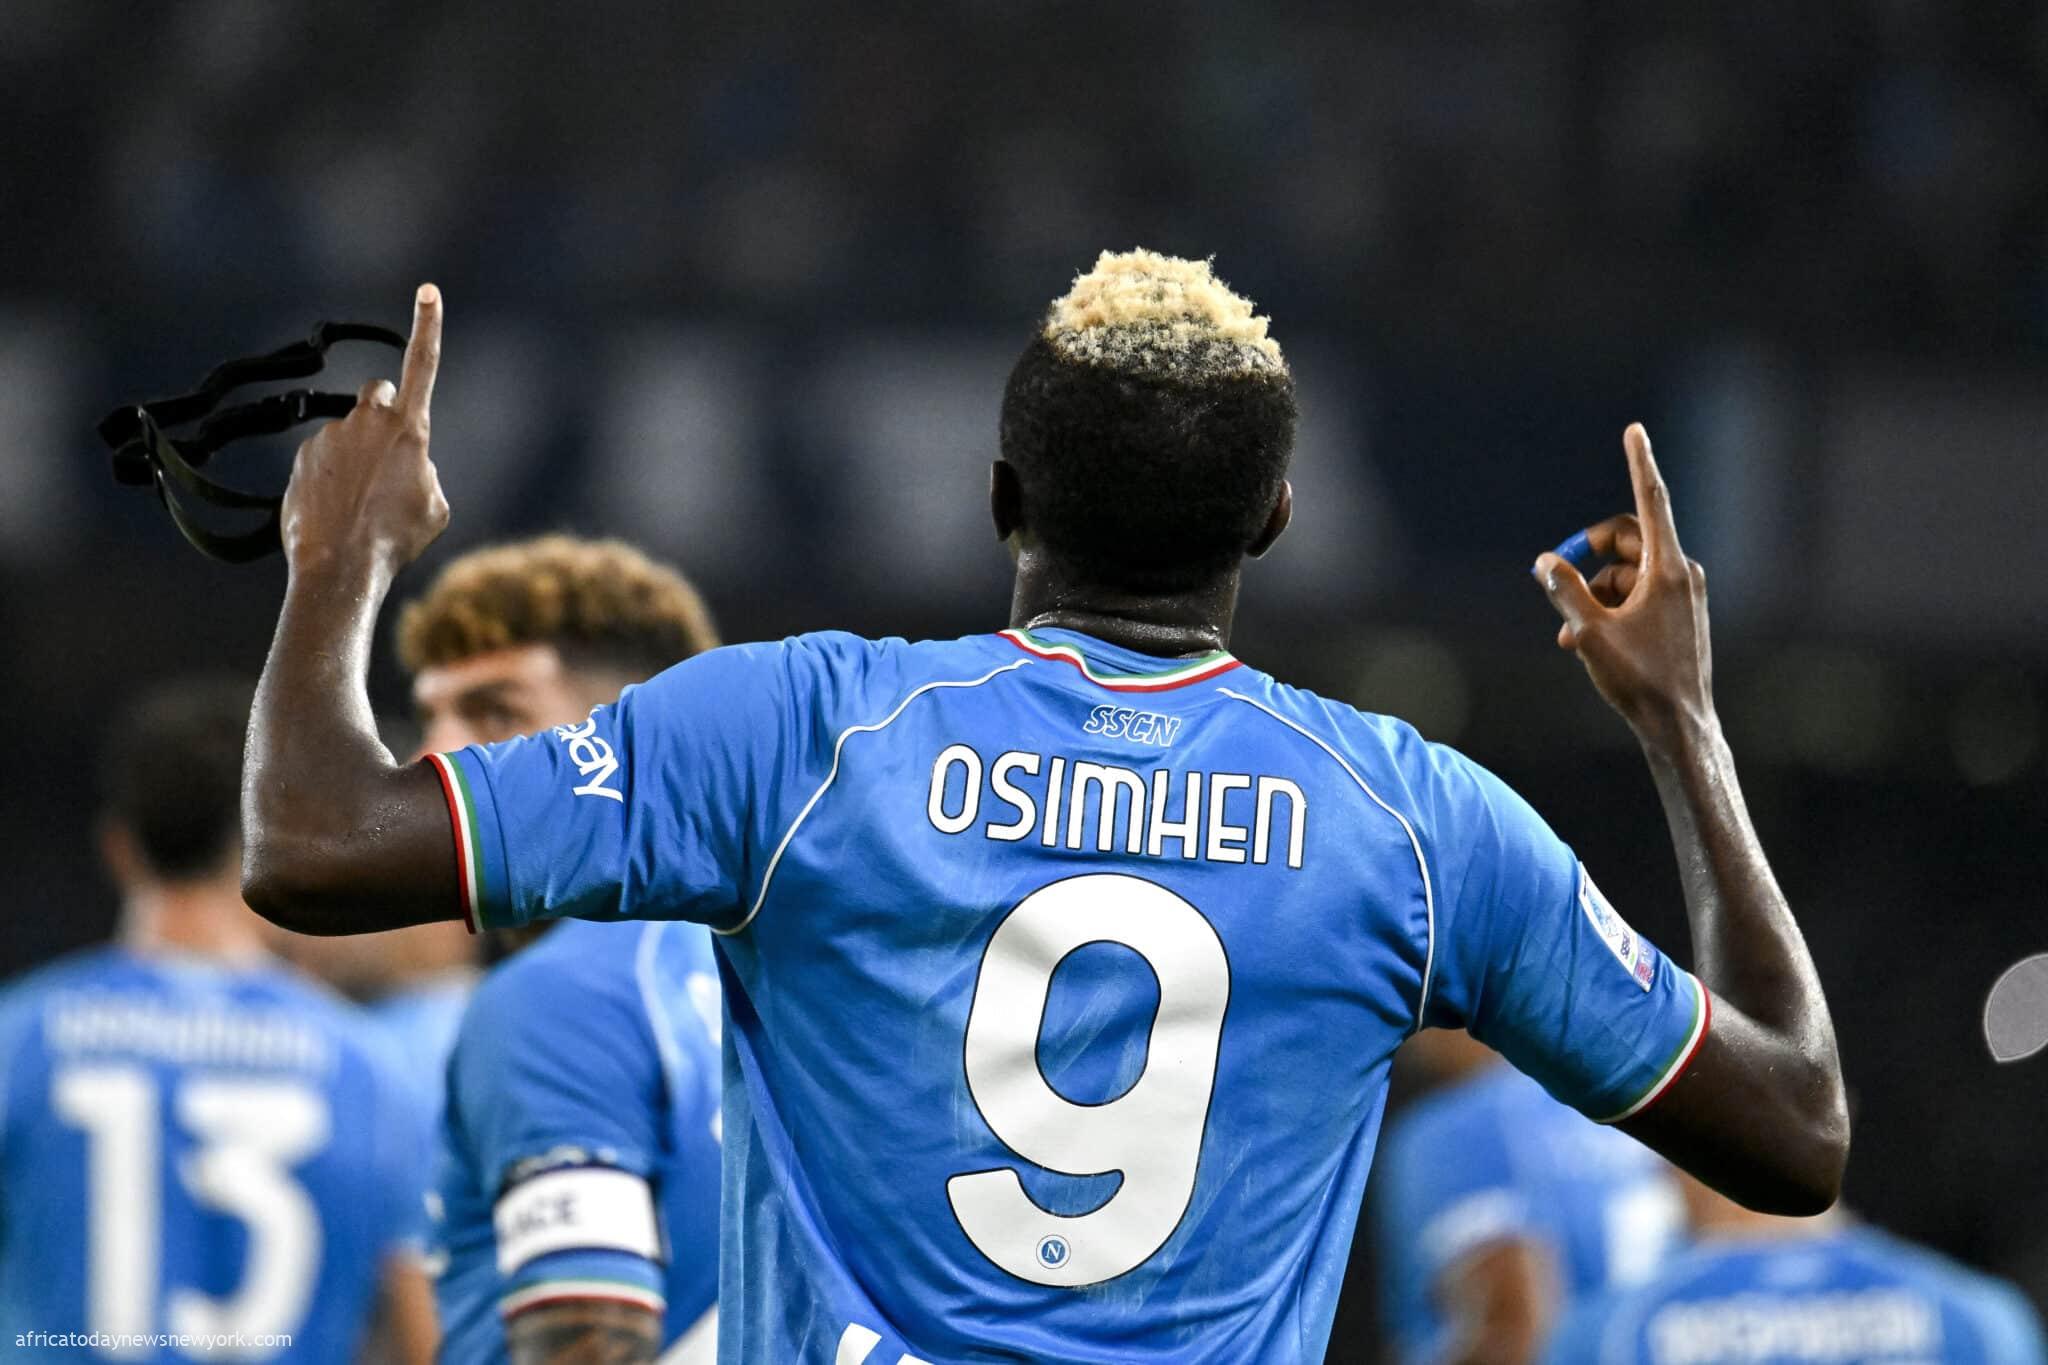 Osimhen Scores 100th Club Goal As Impressive Form Continues